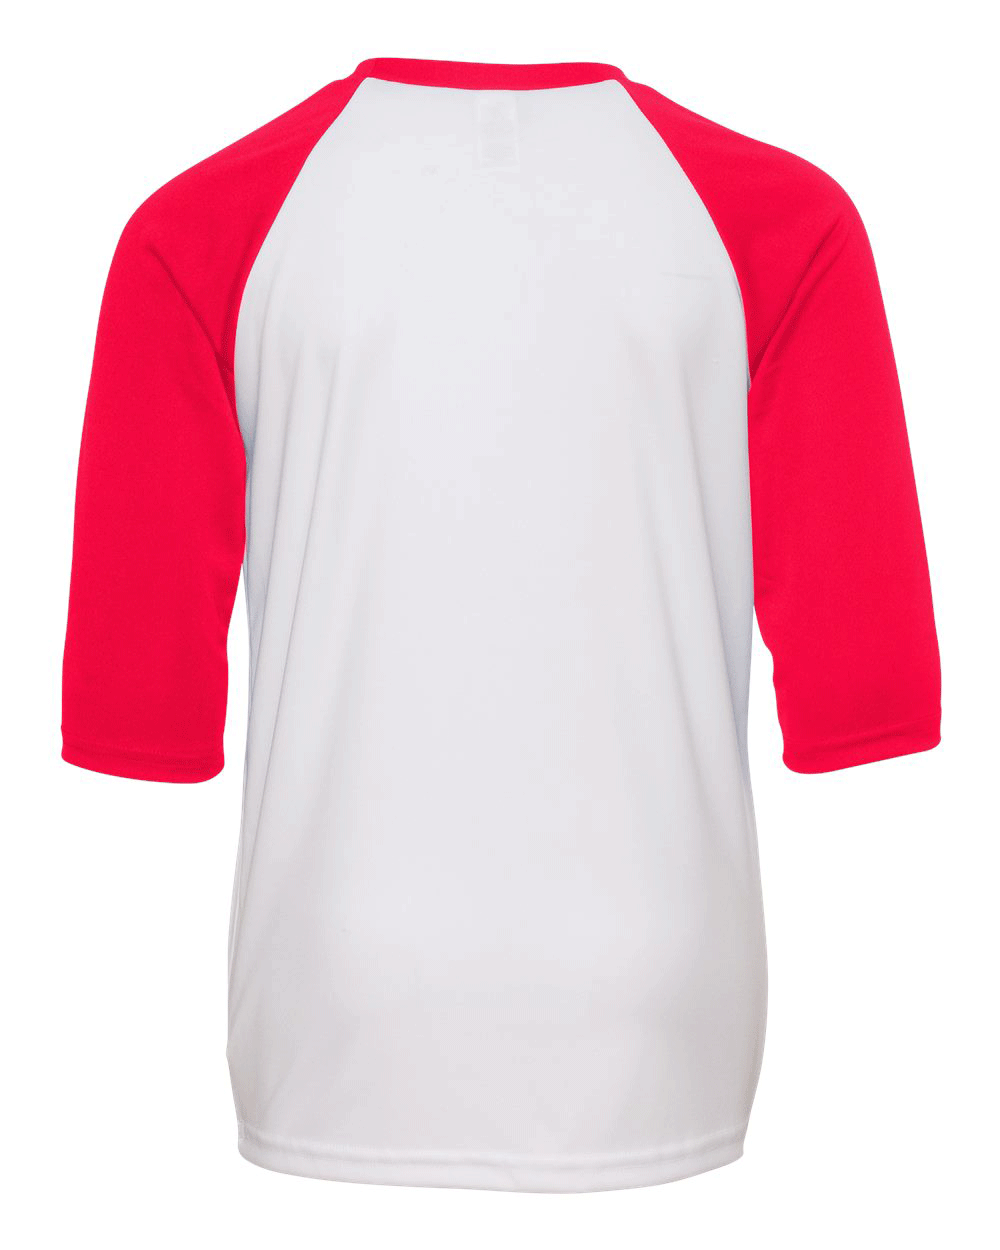 white baseball shirt with red sleeves